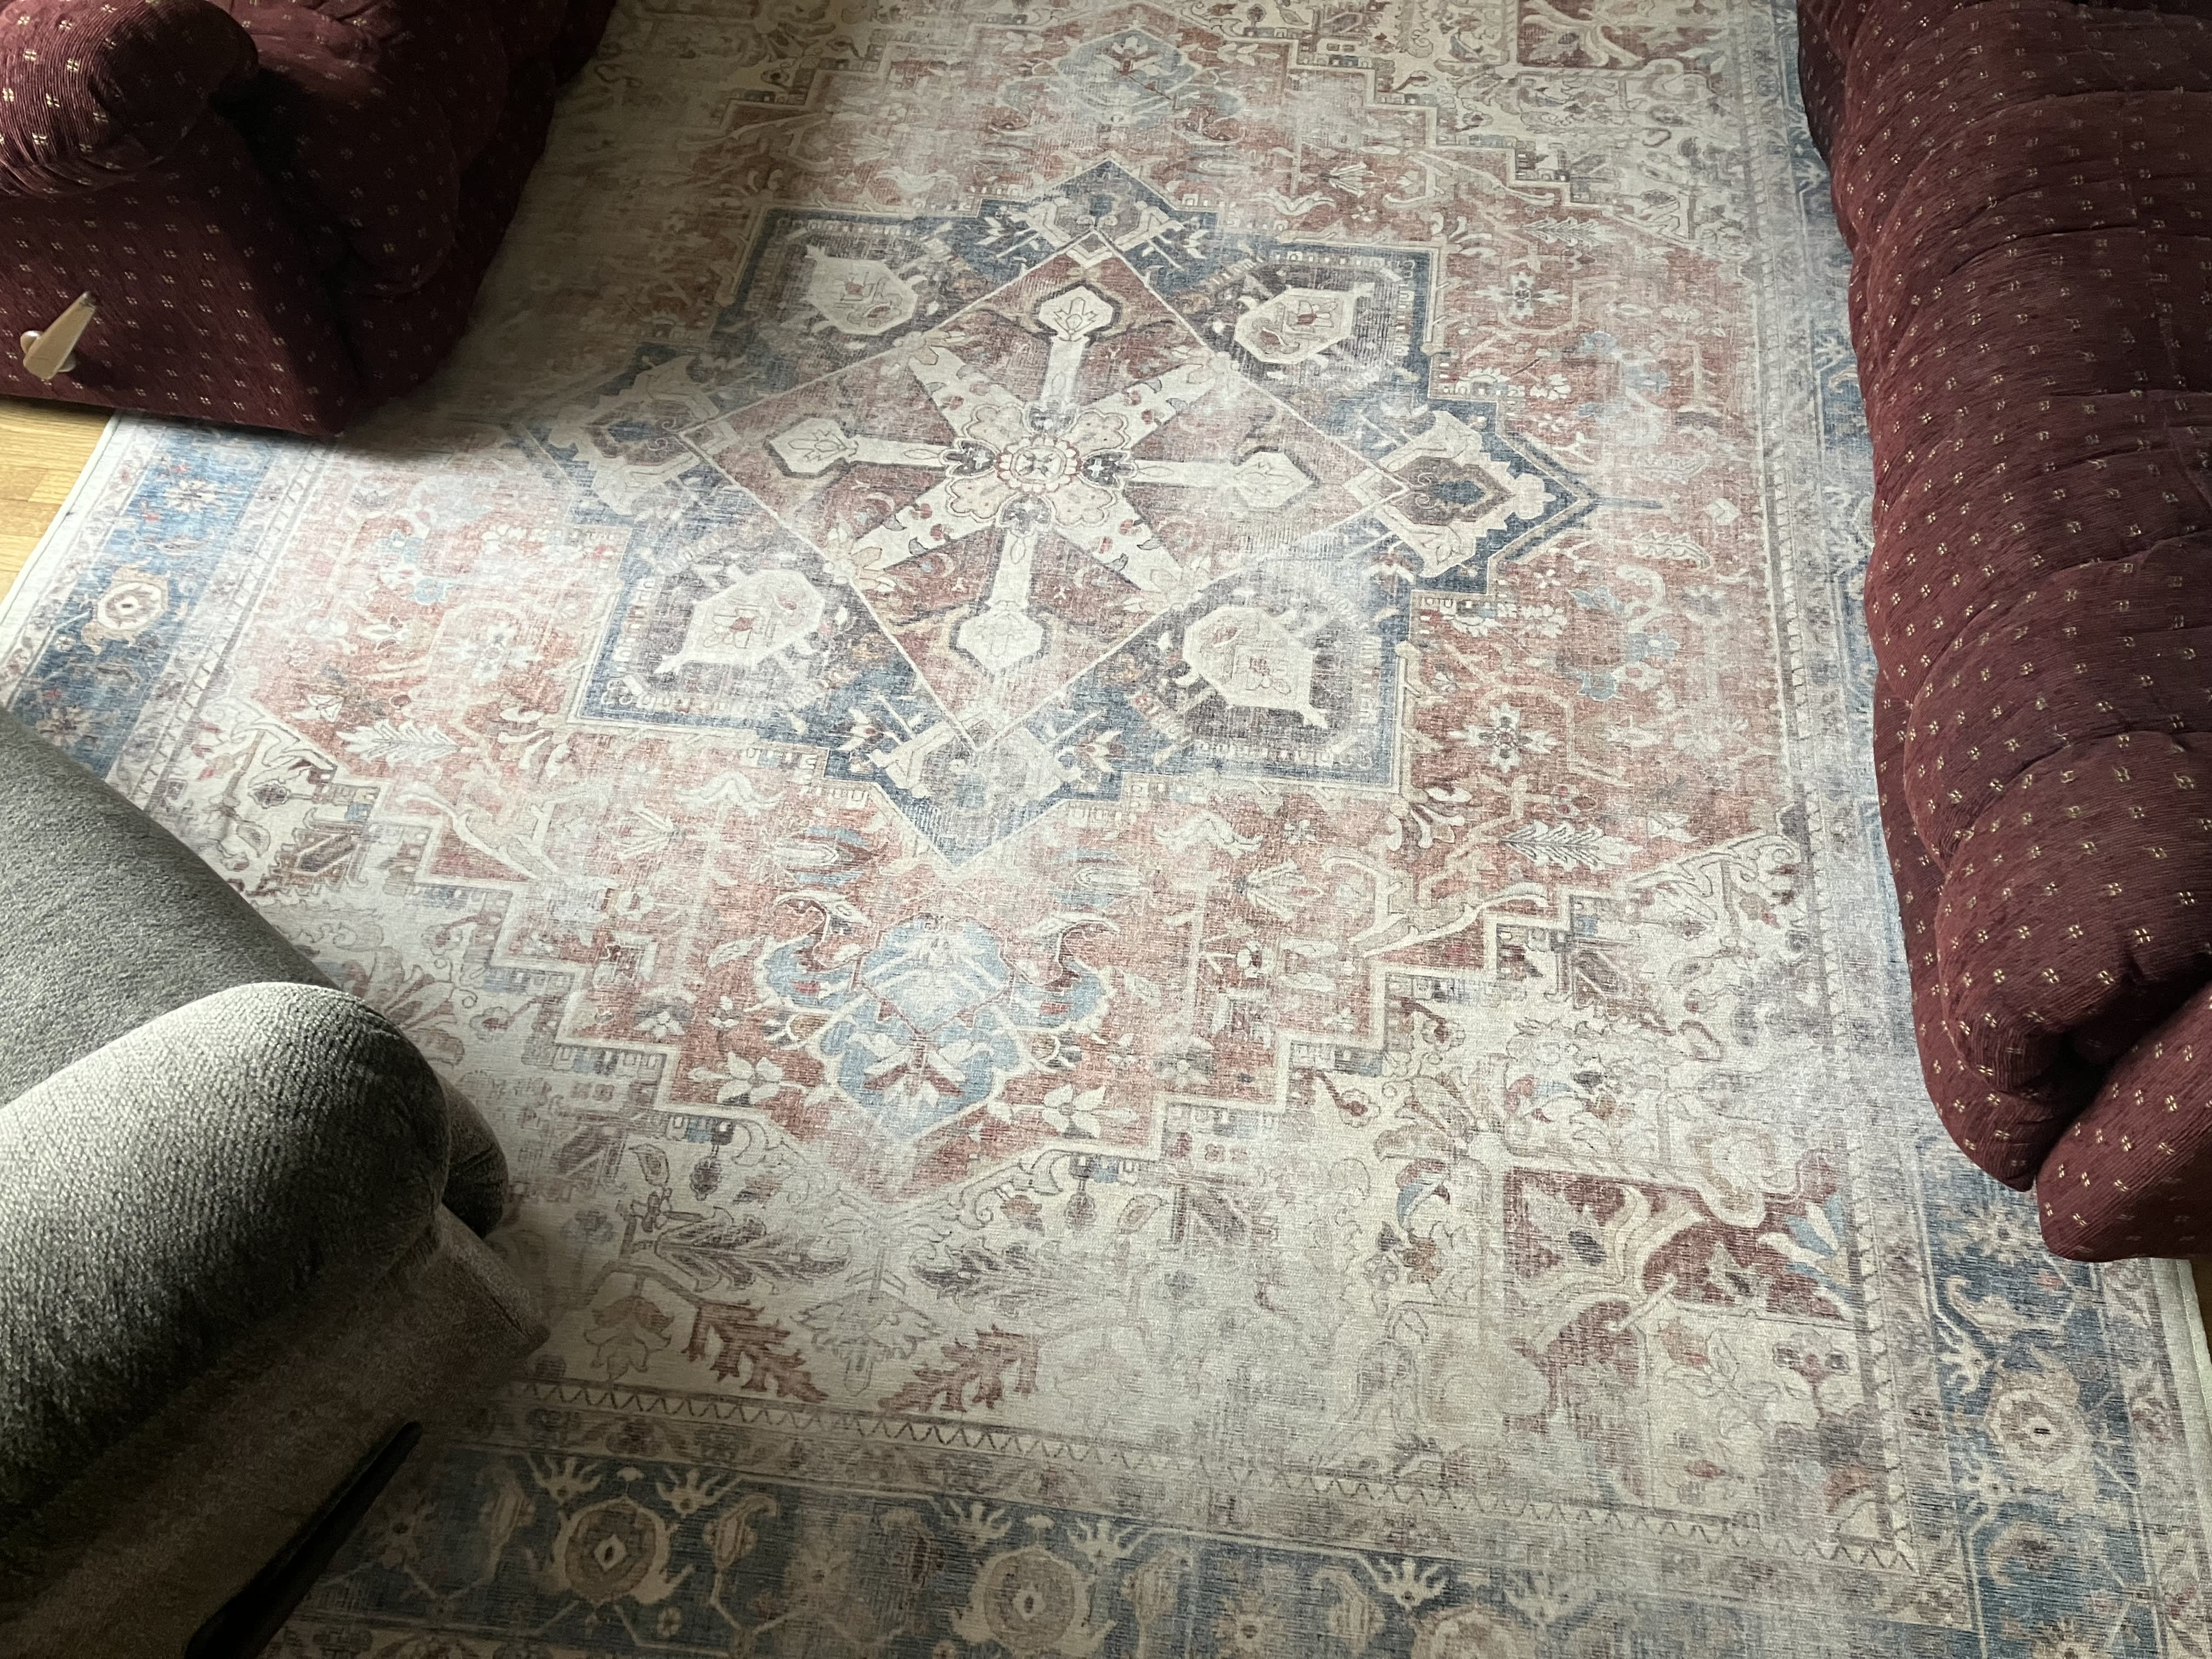 I Bought a Washable Ruggable Rug: Here's My Review